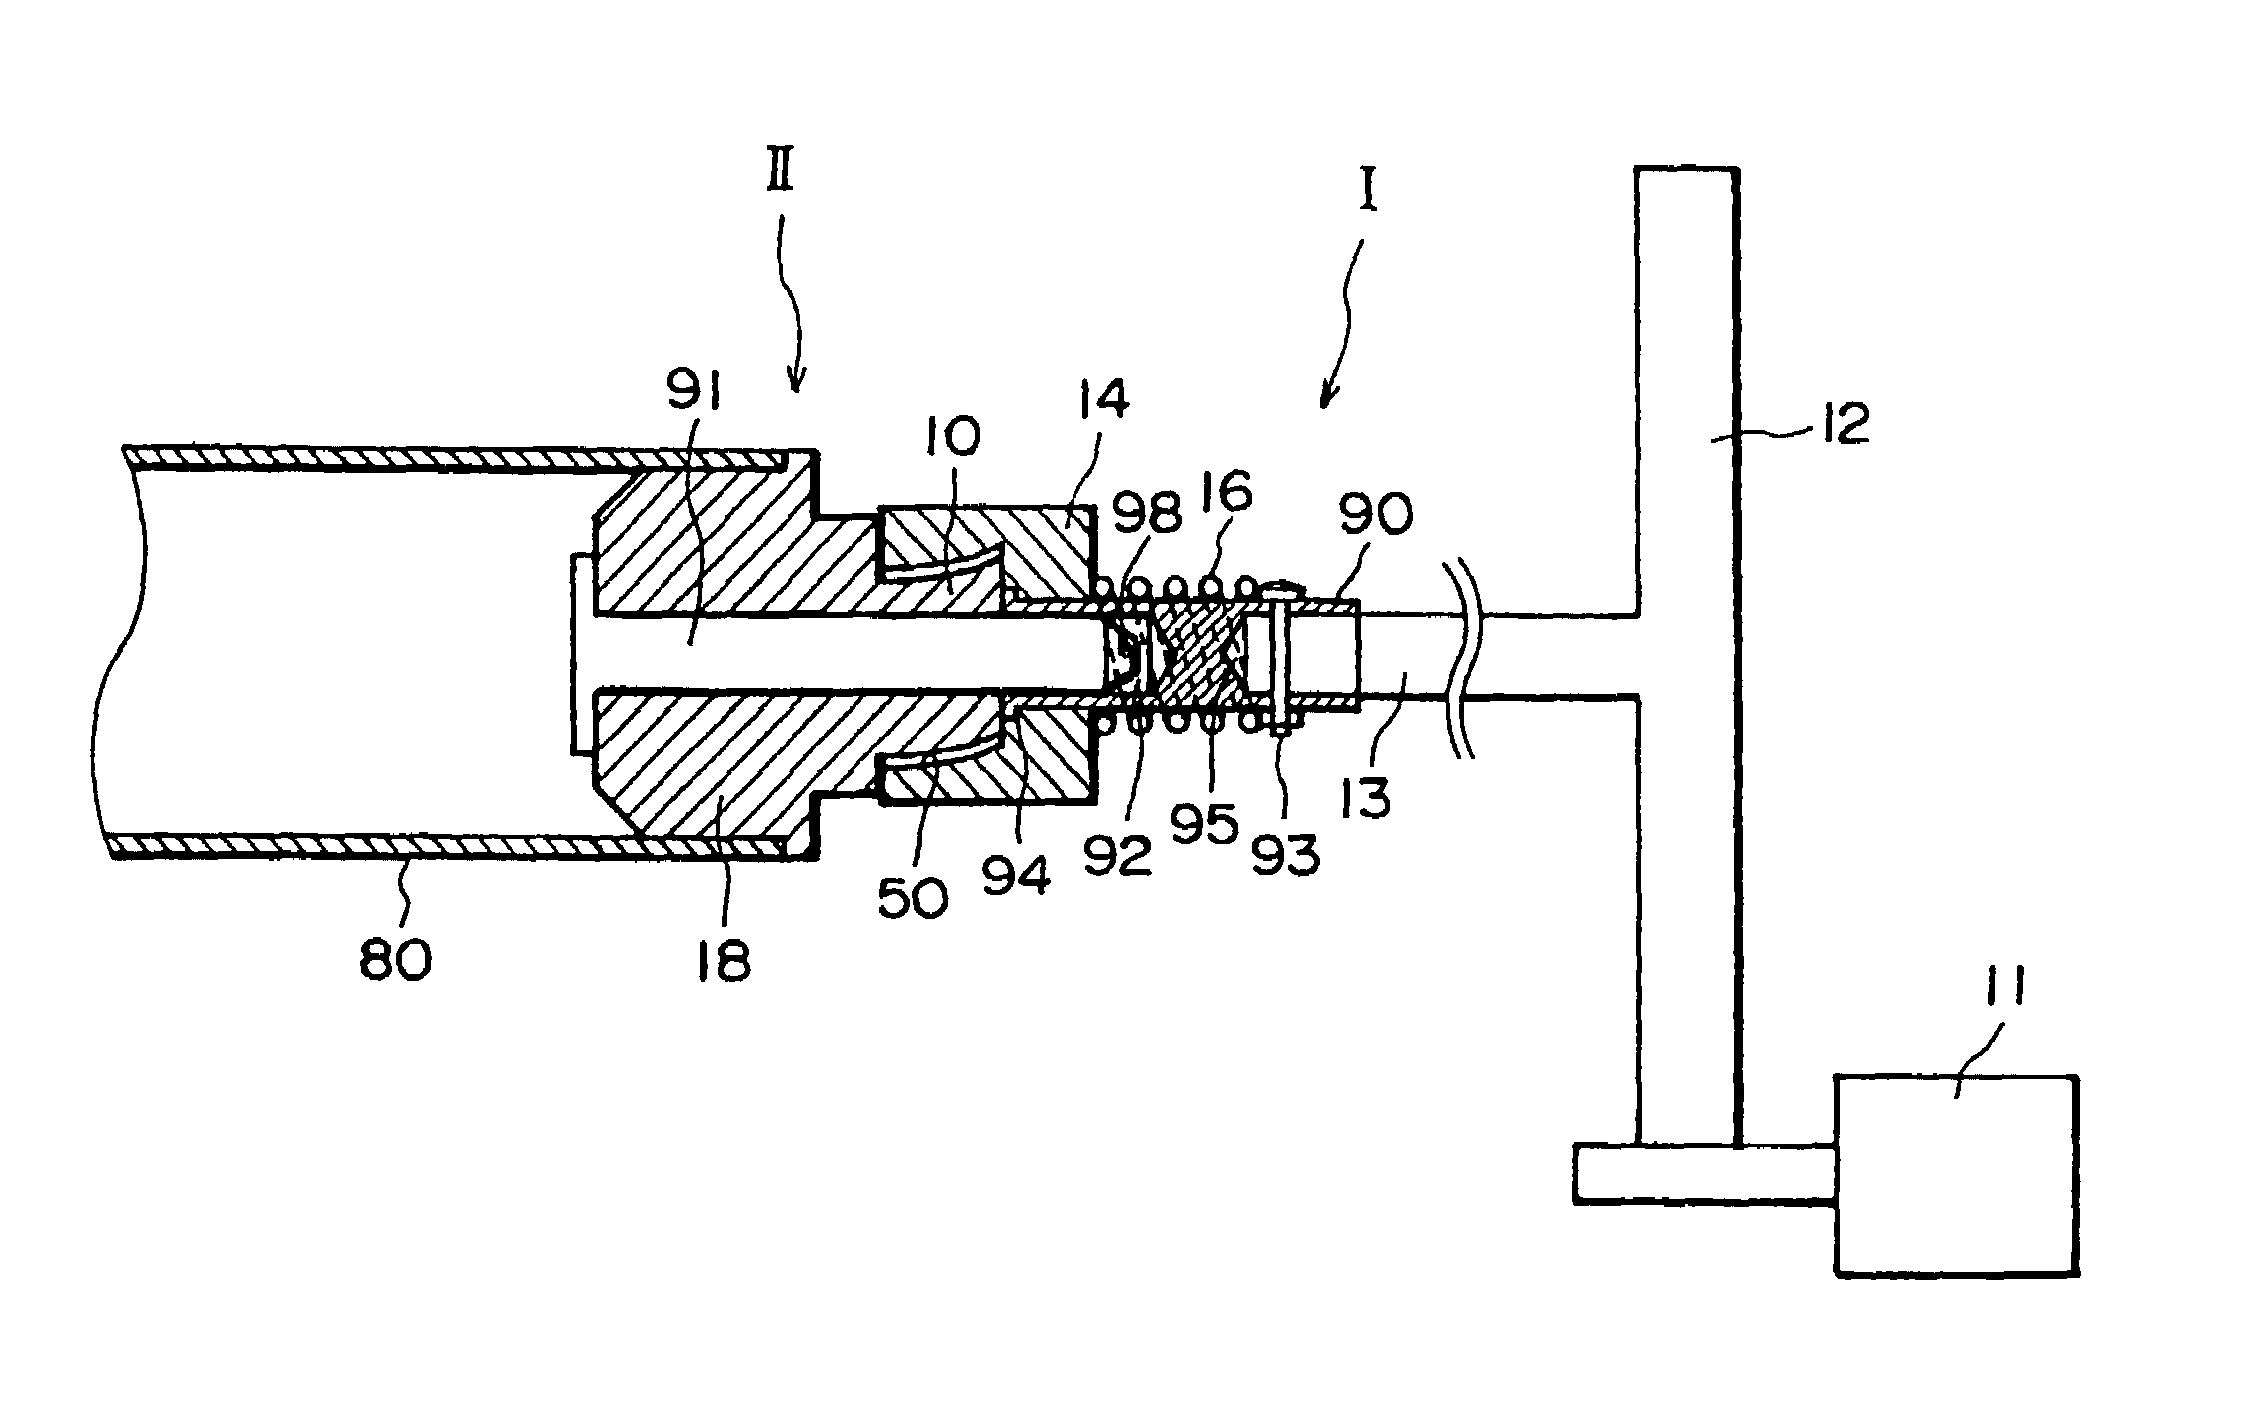 Driving force transmission mechanism, image forming apparatus equipped with such a mechanism, and process unit of such an apparatus